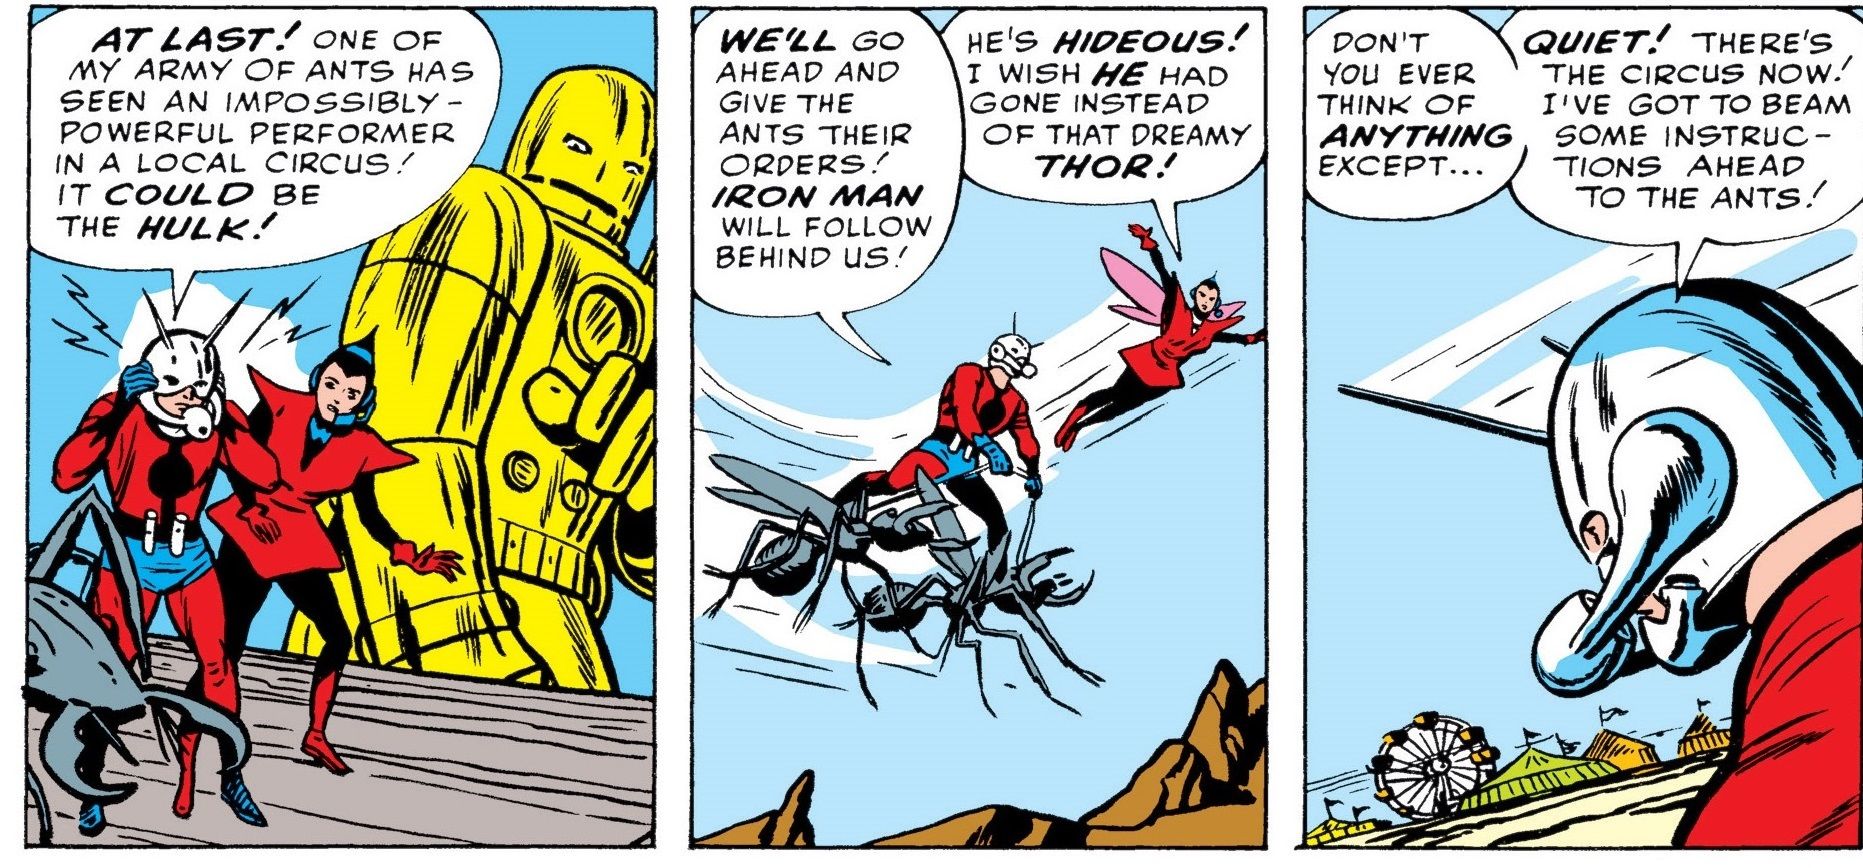 The Wasp in Avengers #1